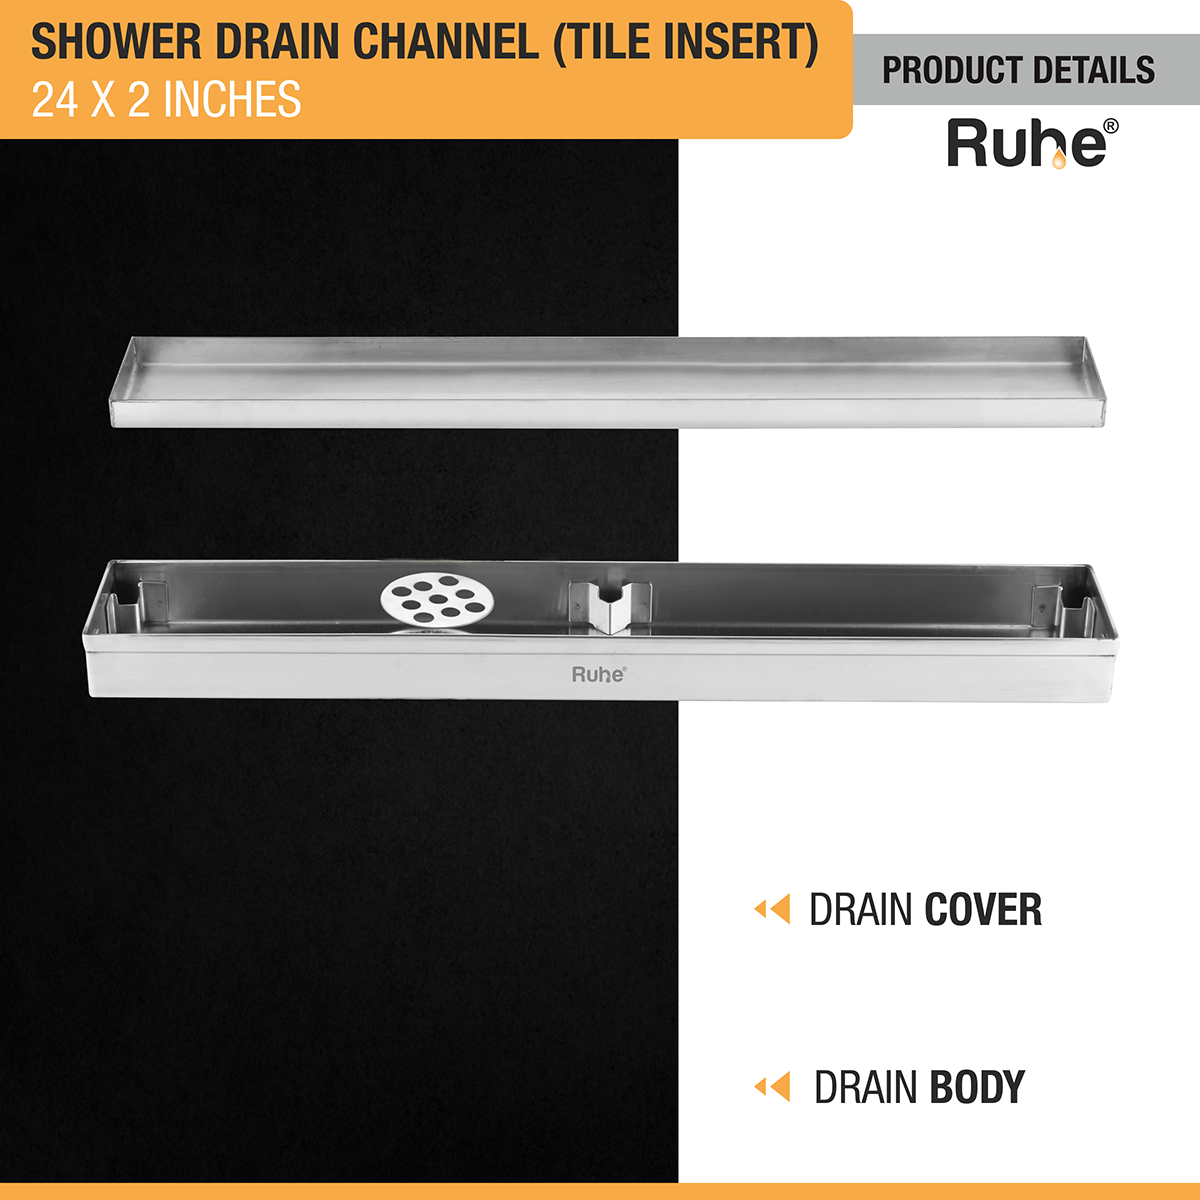 Tile Insert Shower Drain Channel (24 x 2 Inches) (304 Grade) with drain cover and drain body